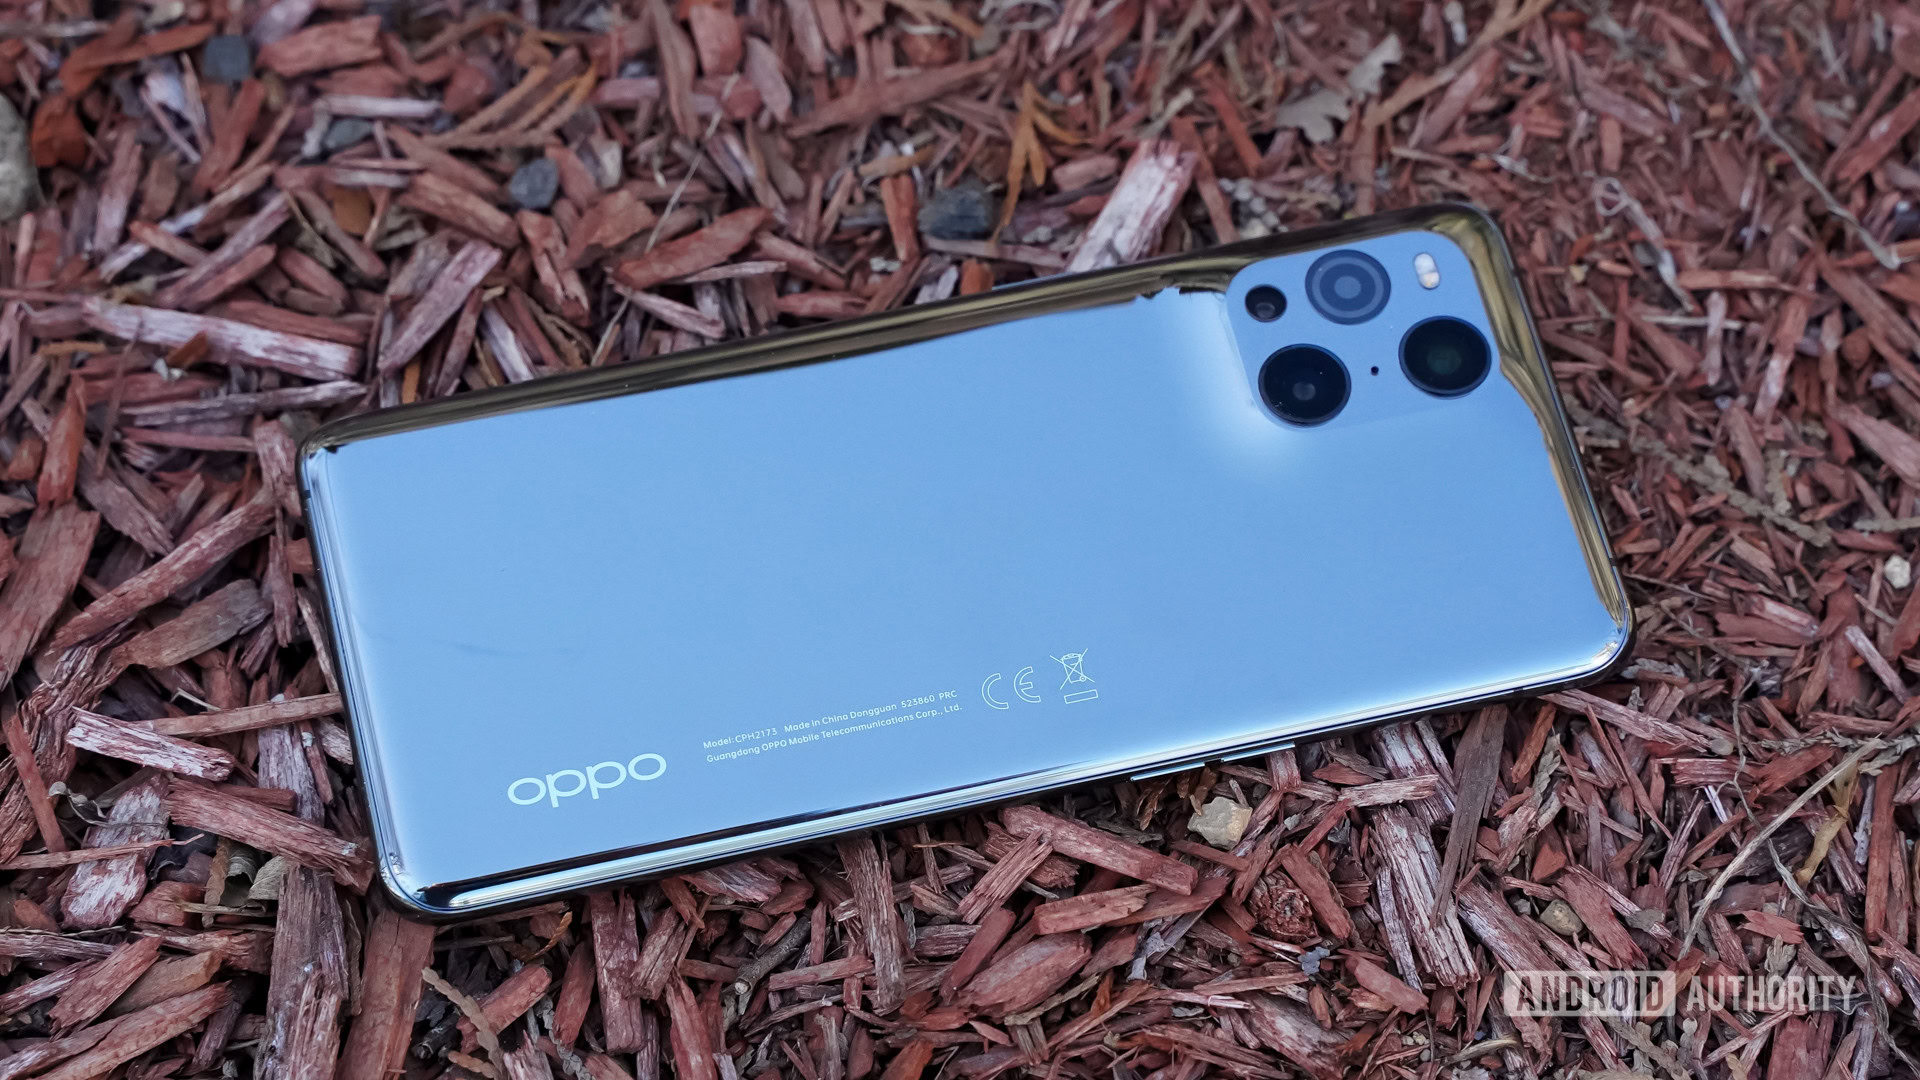 OPPO Find X3 Pro buyer's guide: Everything you need to know